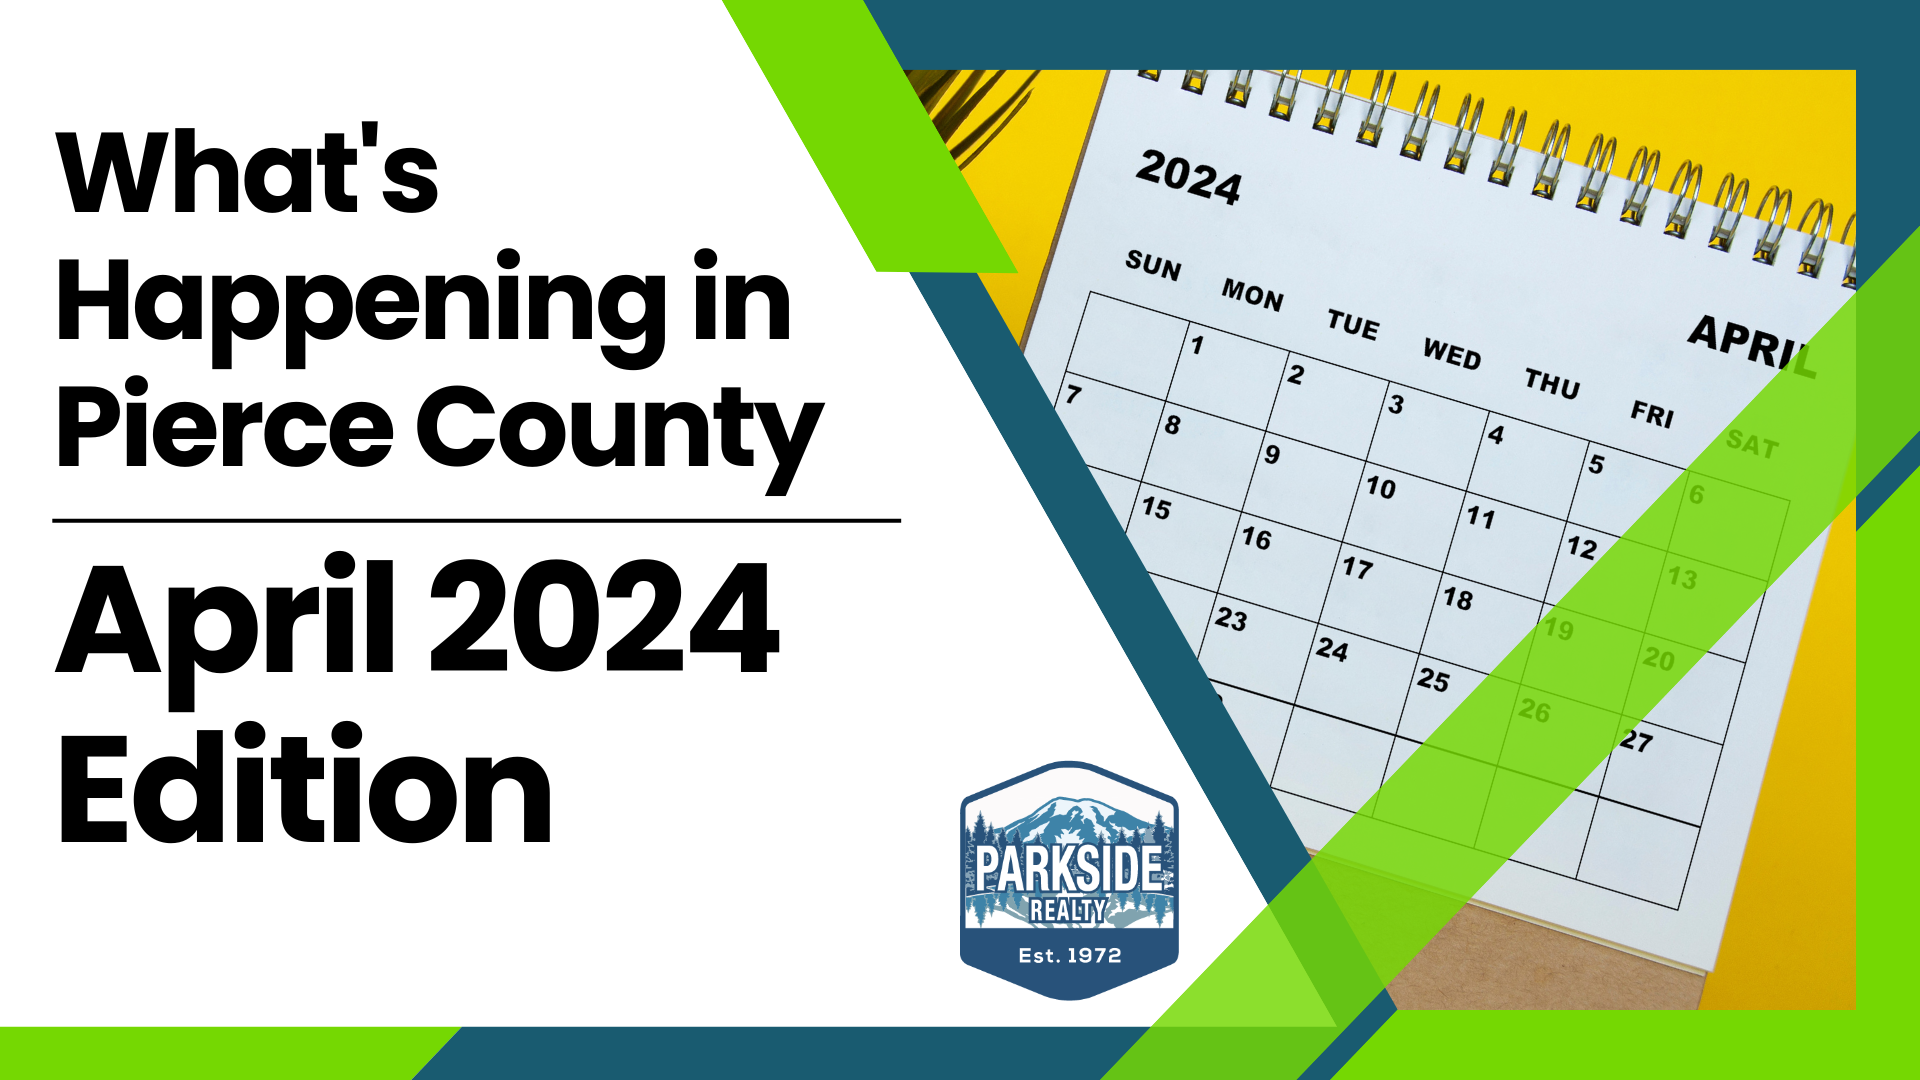 What’s Happening in Pierce County: April 2024 Edition